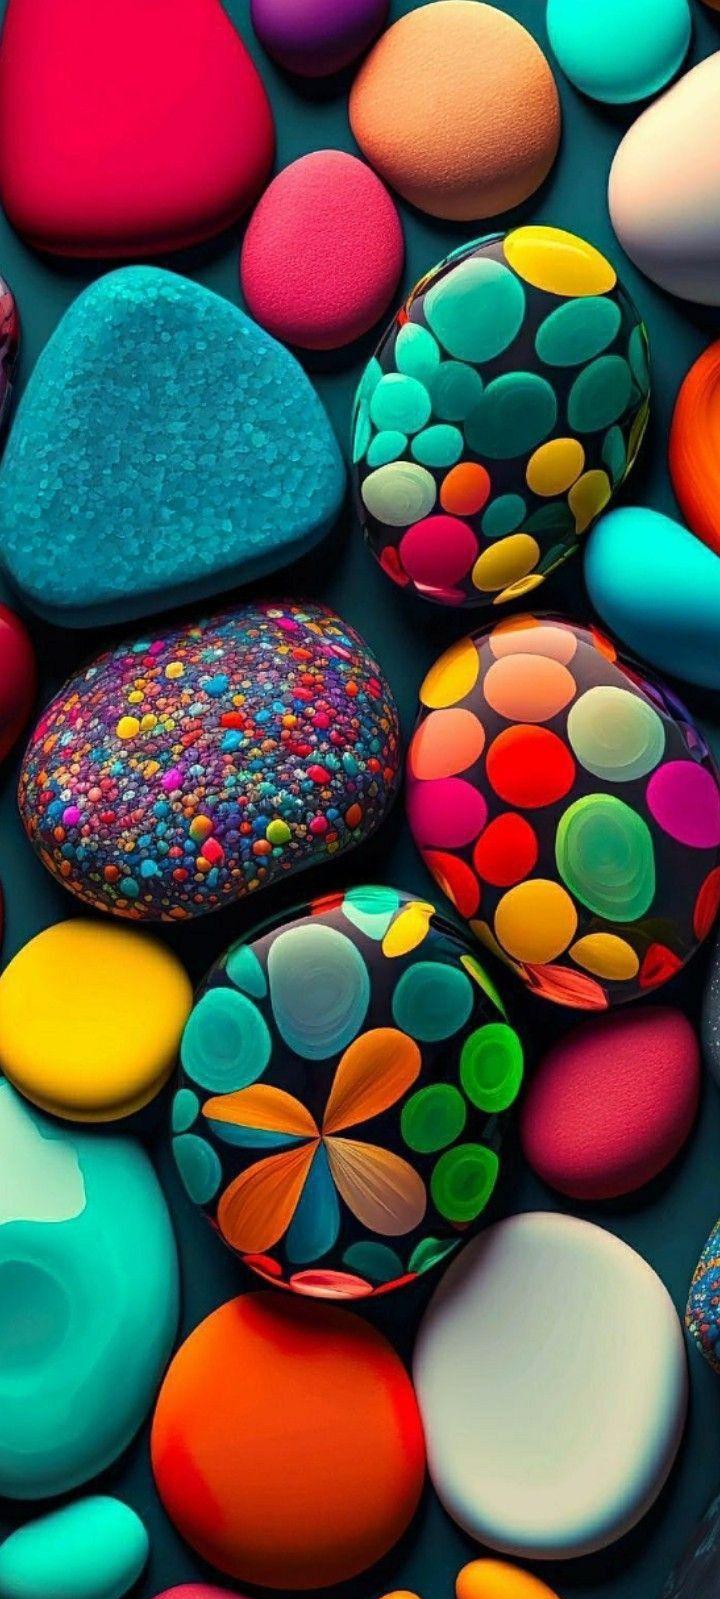 Colourful Stones In Android Wallpaper Abstract Nature